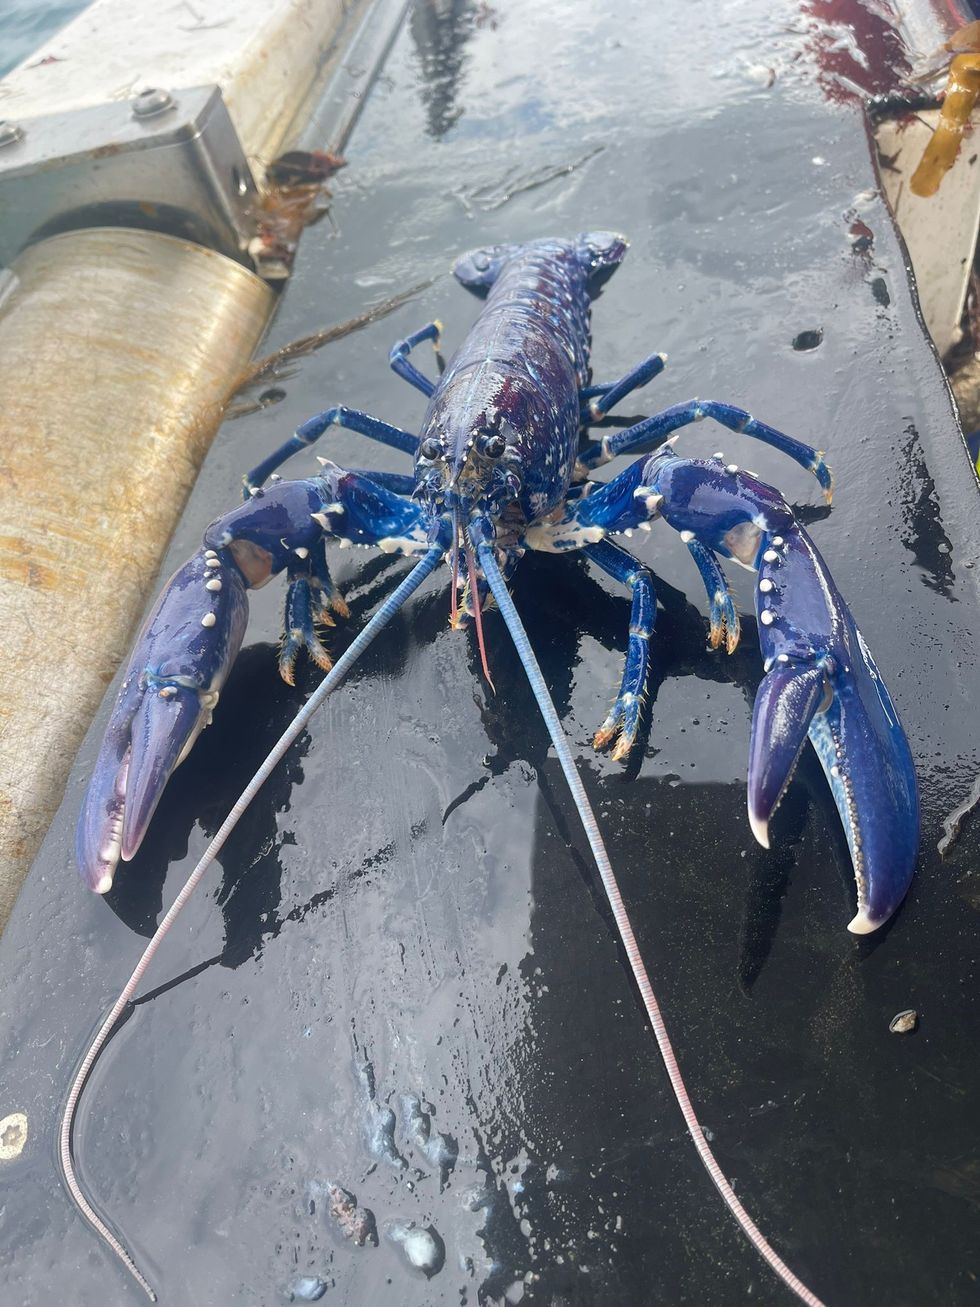 Fisherman lands catch of a lifetime blue lobster – for the second time